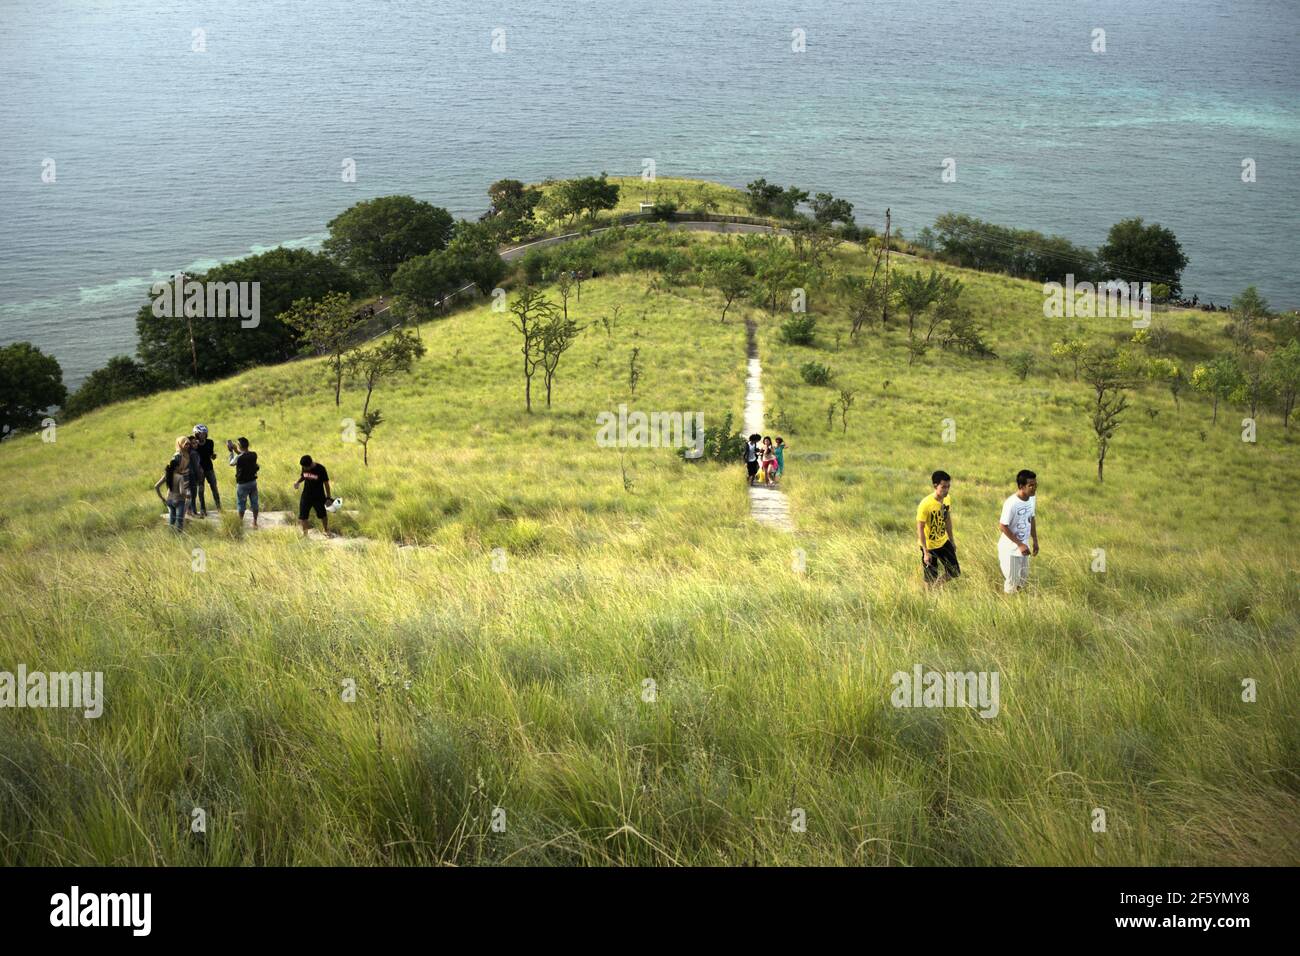 Young people having recreational time by walking on stoned steps through grassland in Kajuwulu near Maumere, Flores Island. Stock Photo